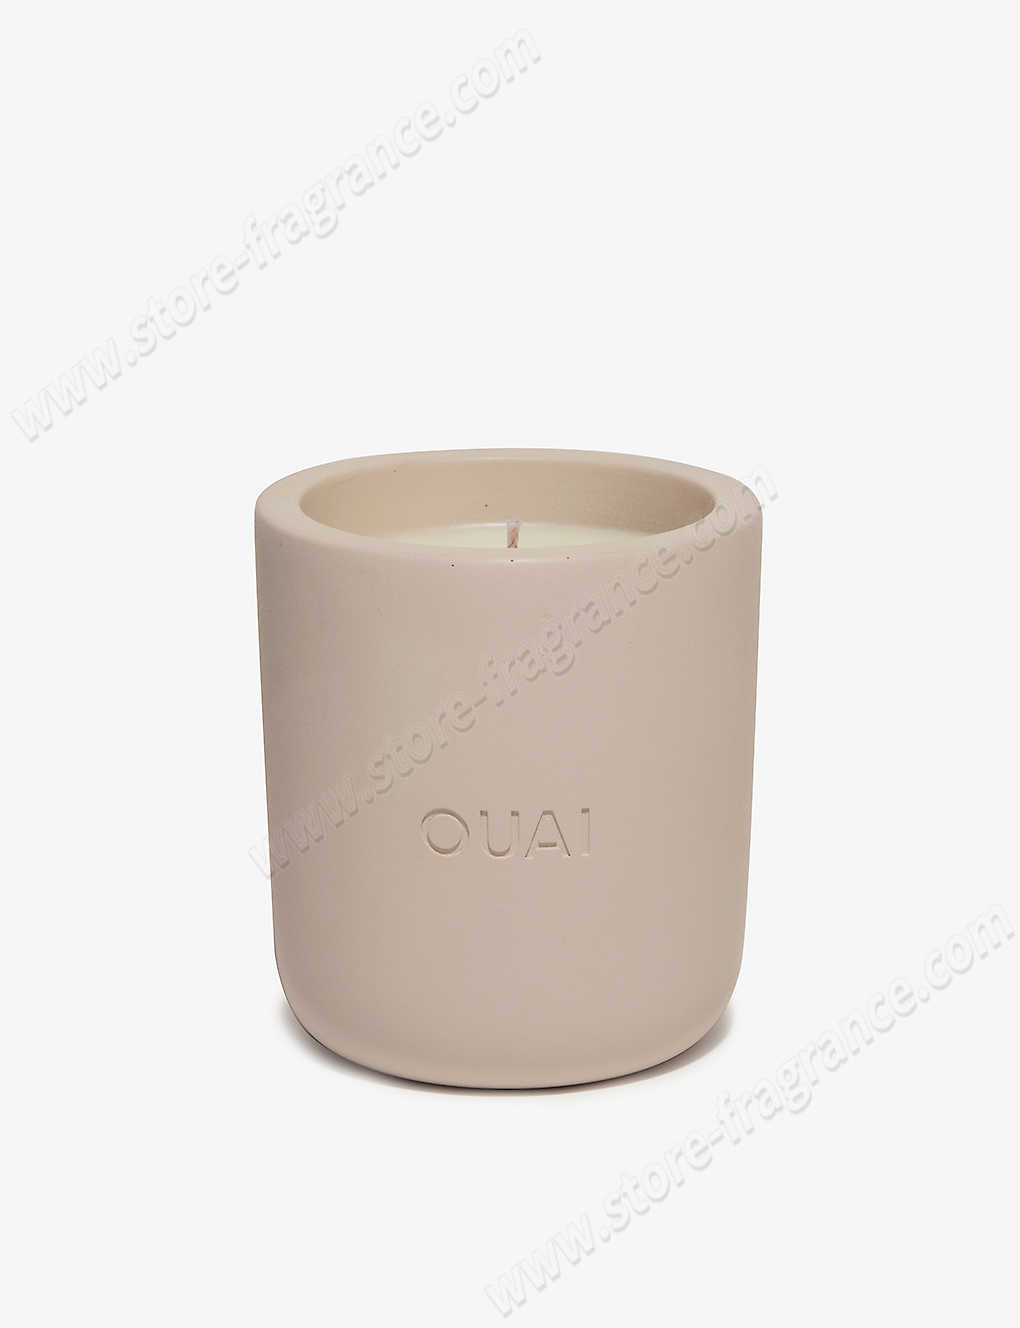 OUAI/Melrose Place scented candle 229g ✿ Discount Store - -0